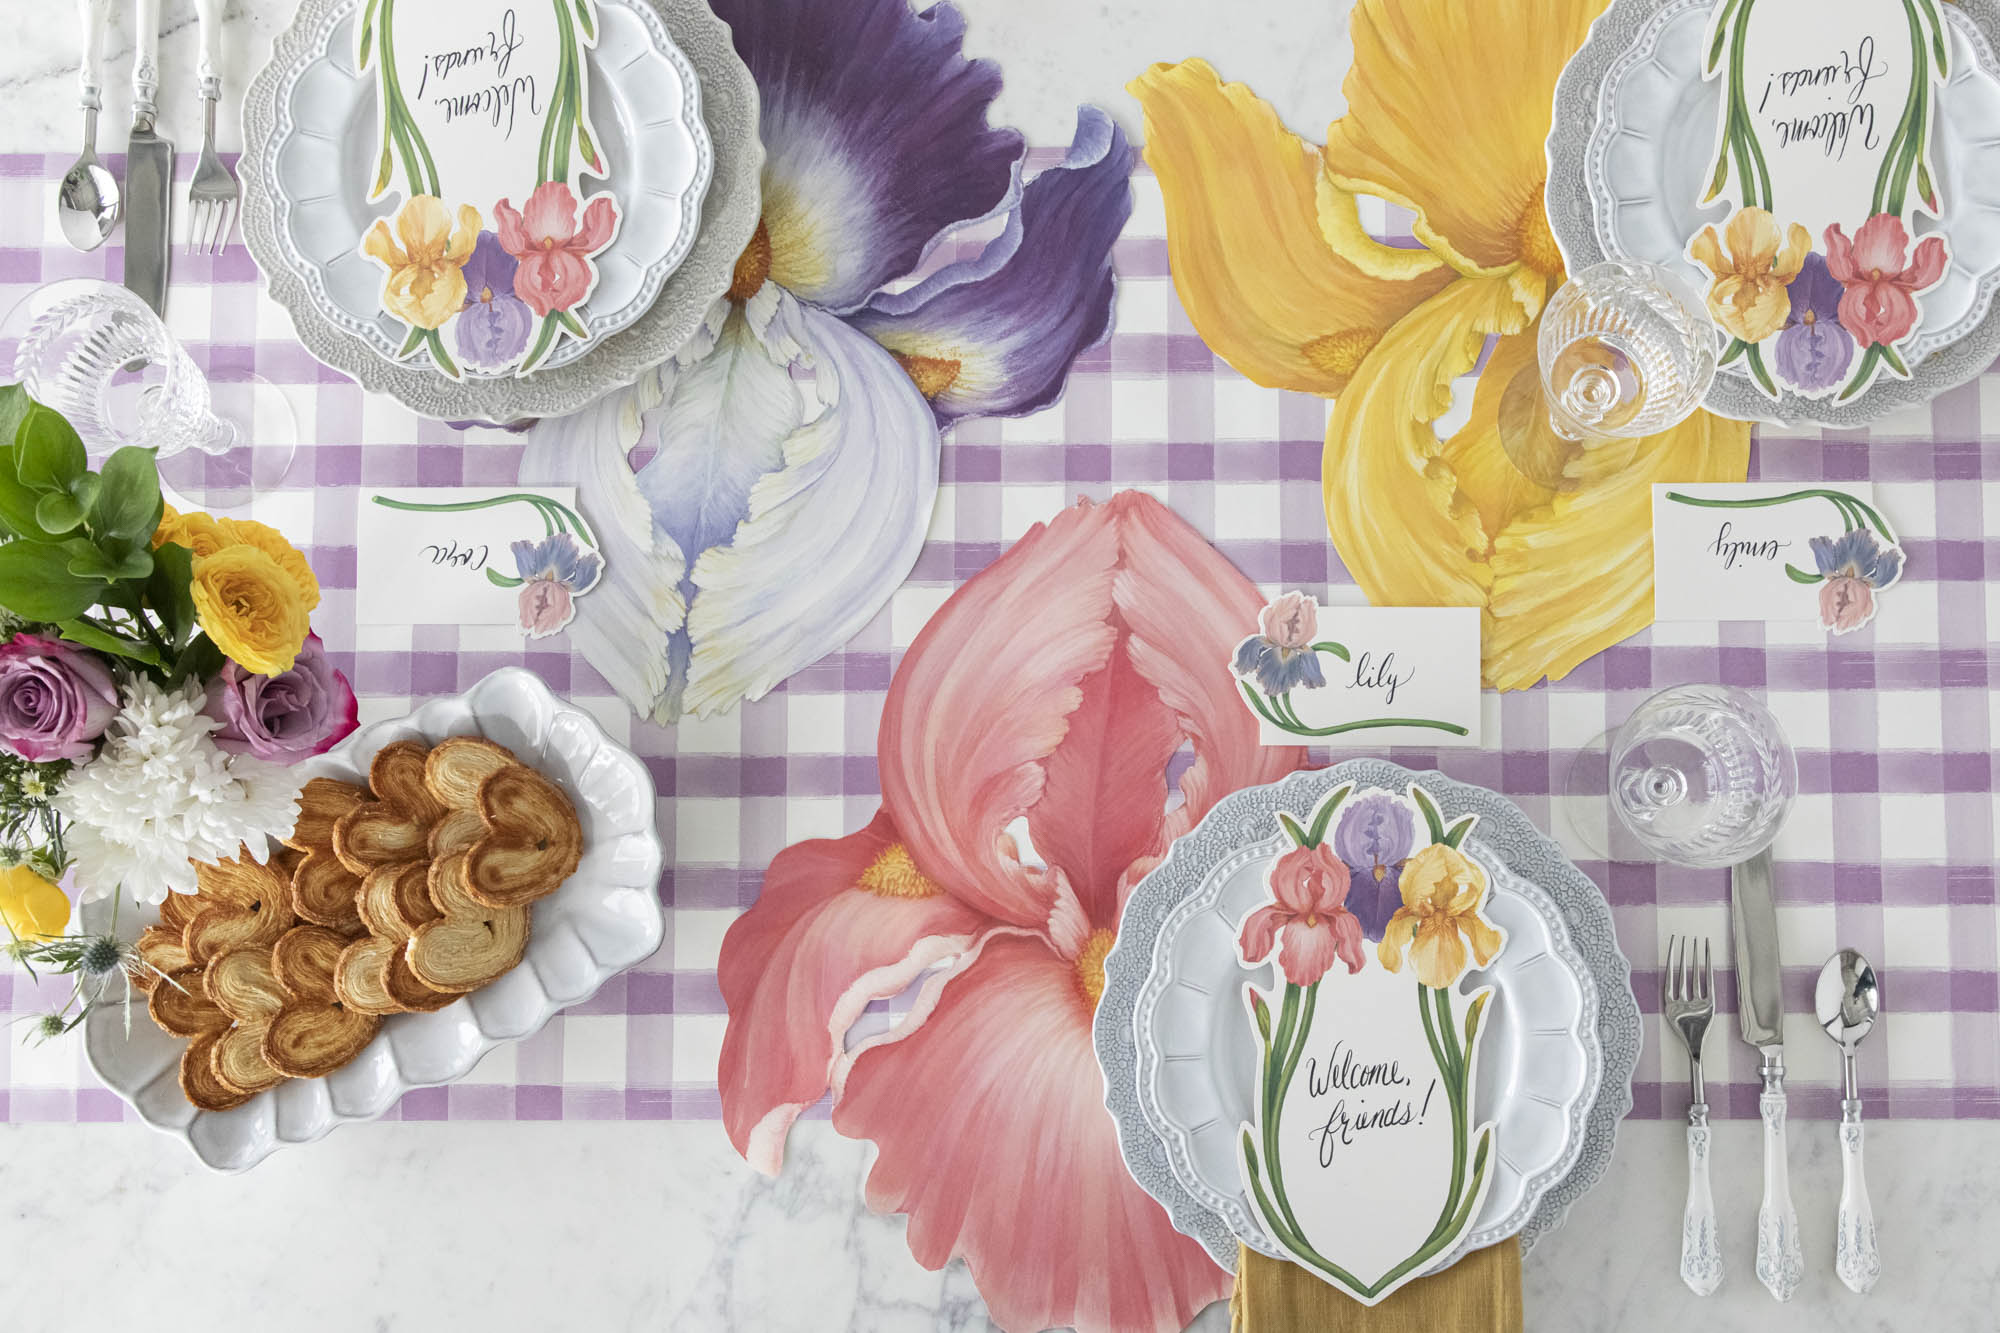 The Die-cut Iris Placemats under a bright springtime table setting, from above.